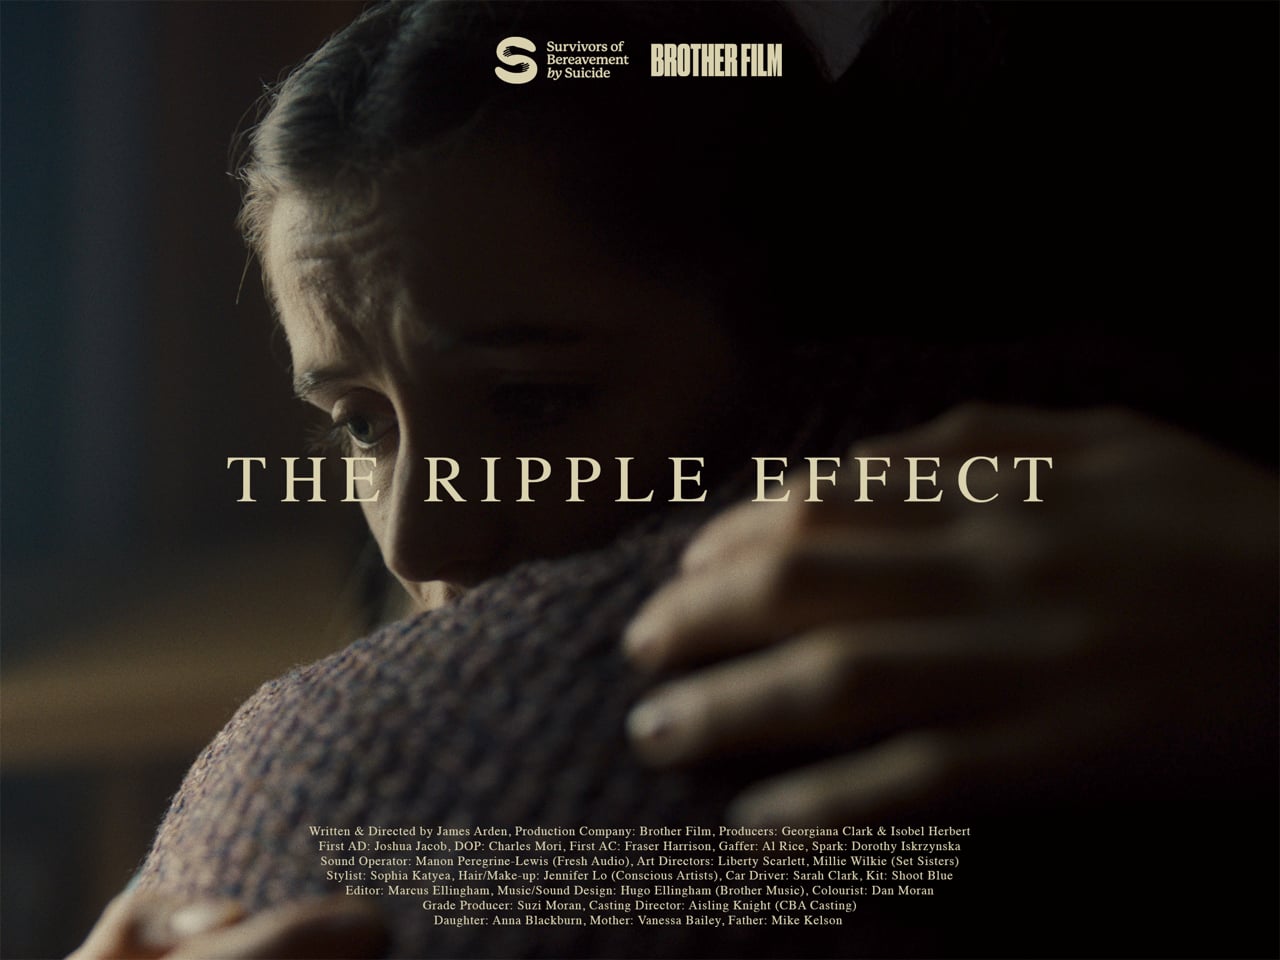 The Ripple Effect - Brother Film - Survivors of Bereavement by Suicide (UK Charity)